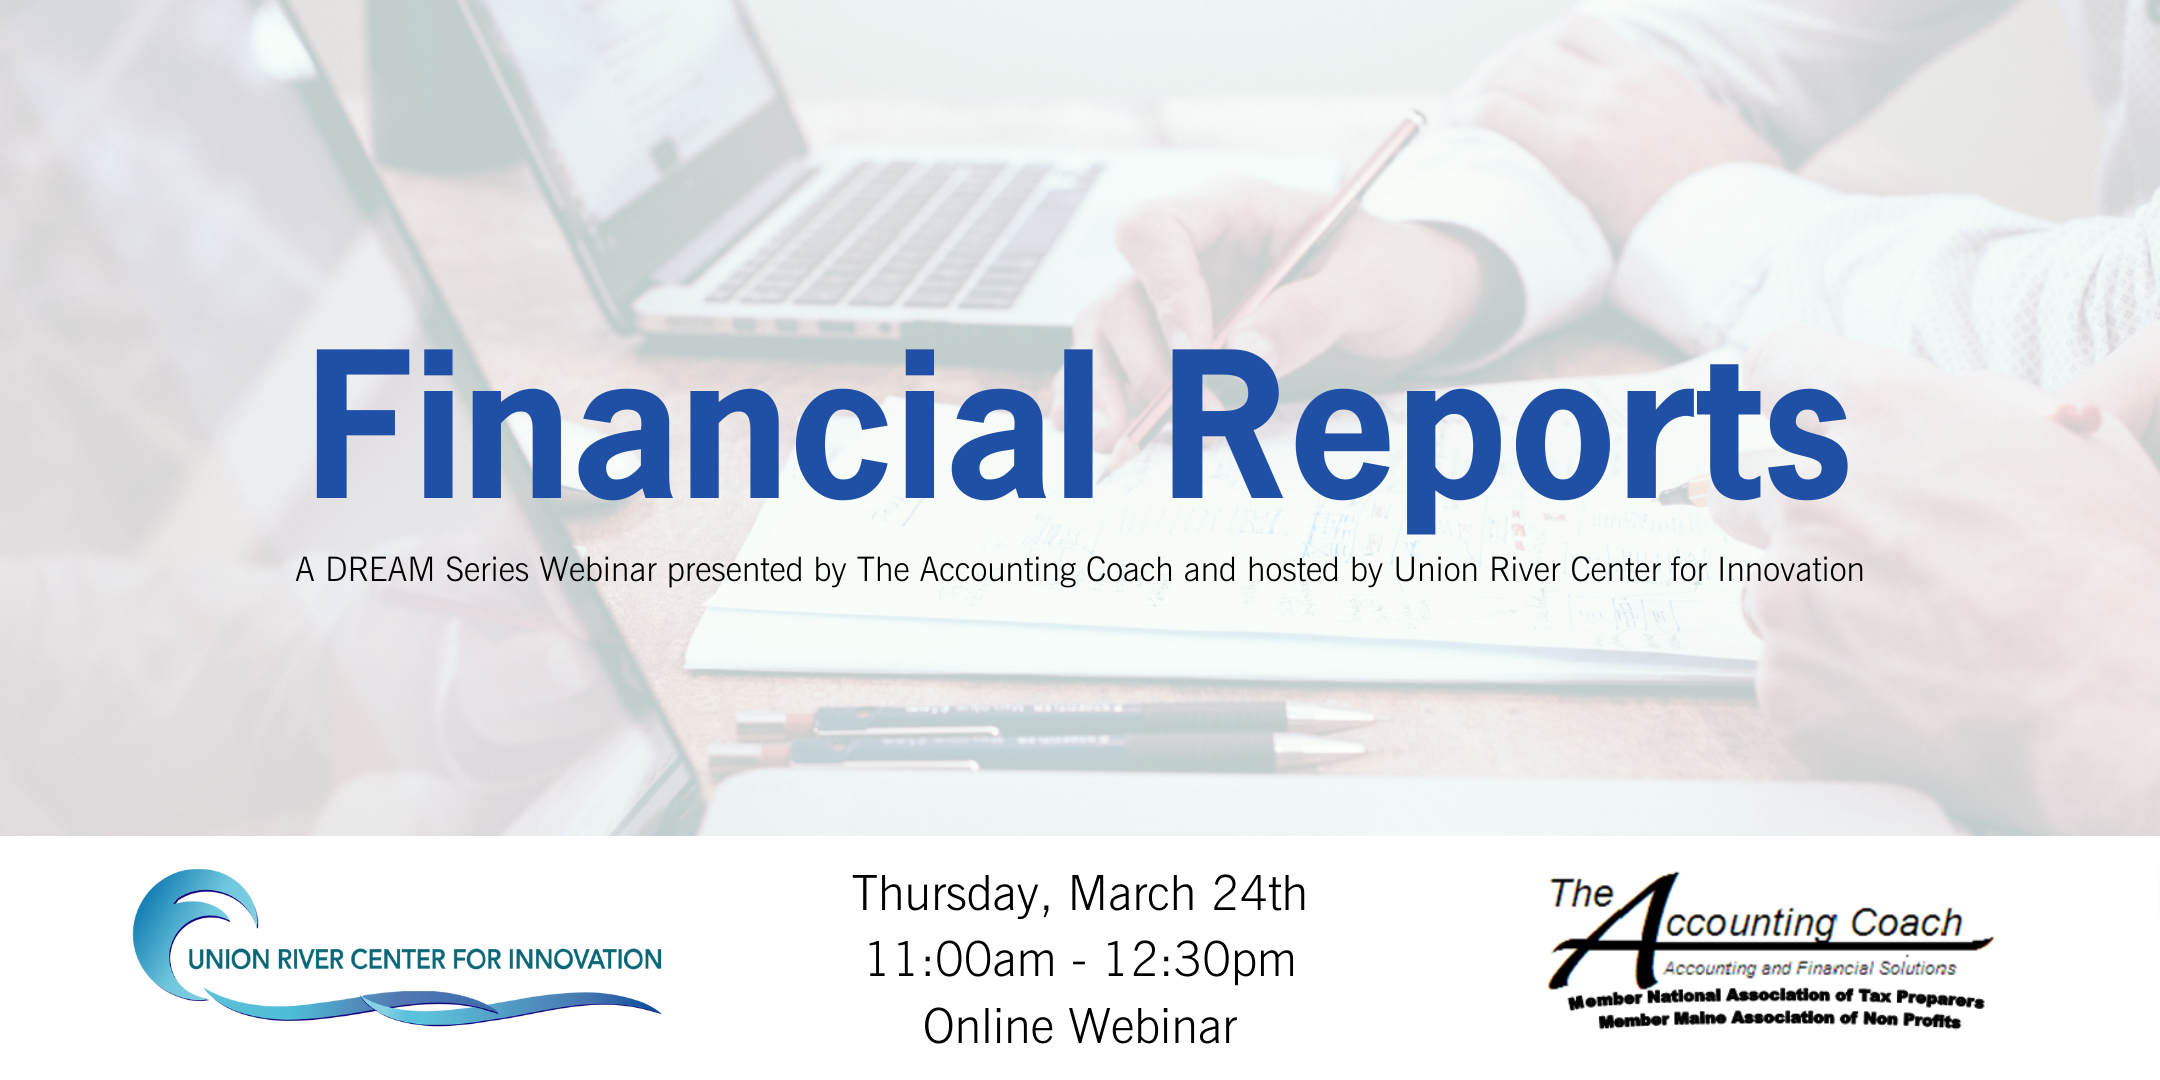 Financial Reports Webinar | Union River Center for Innovation